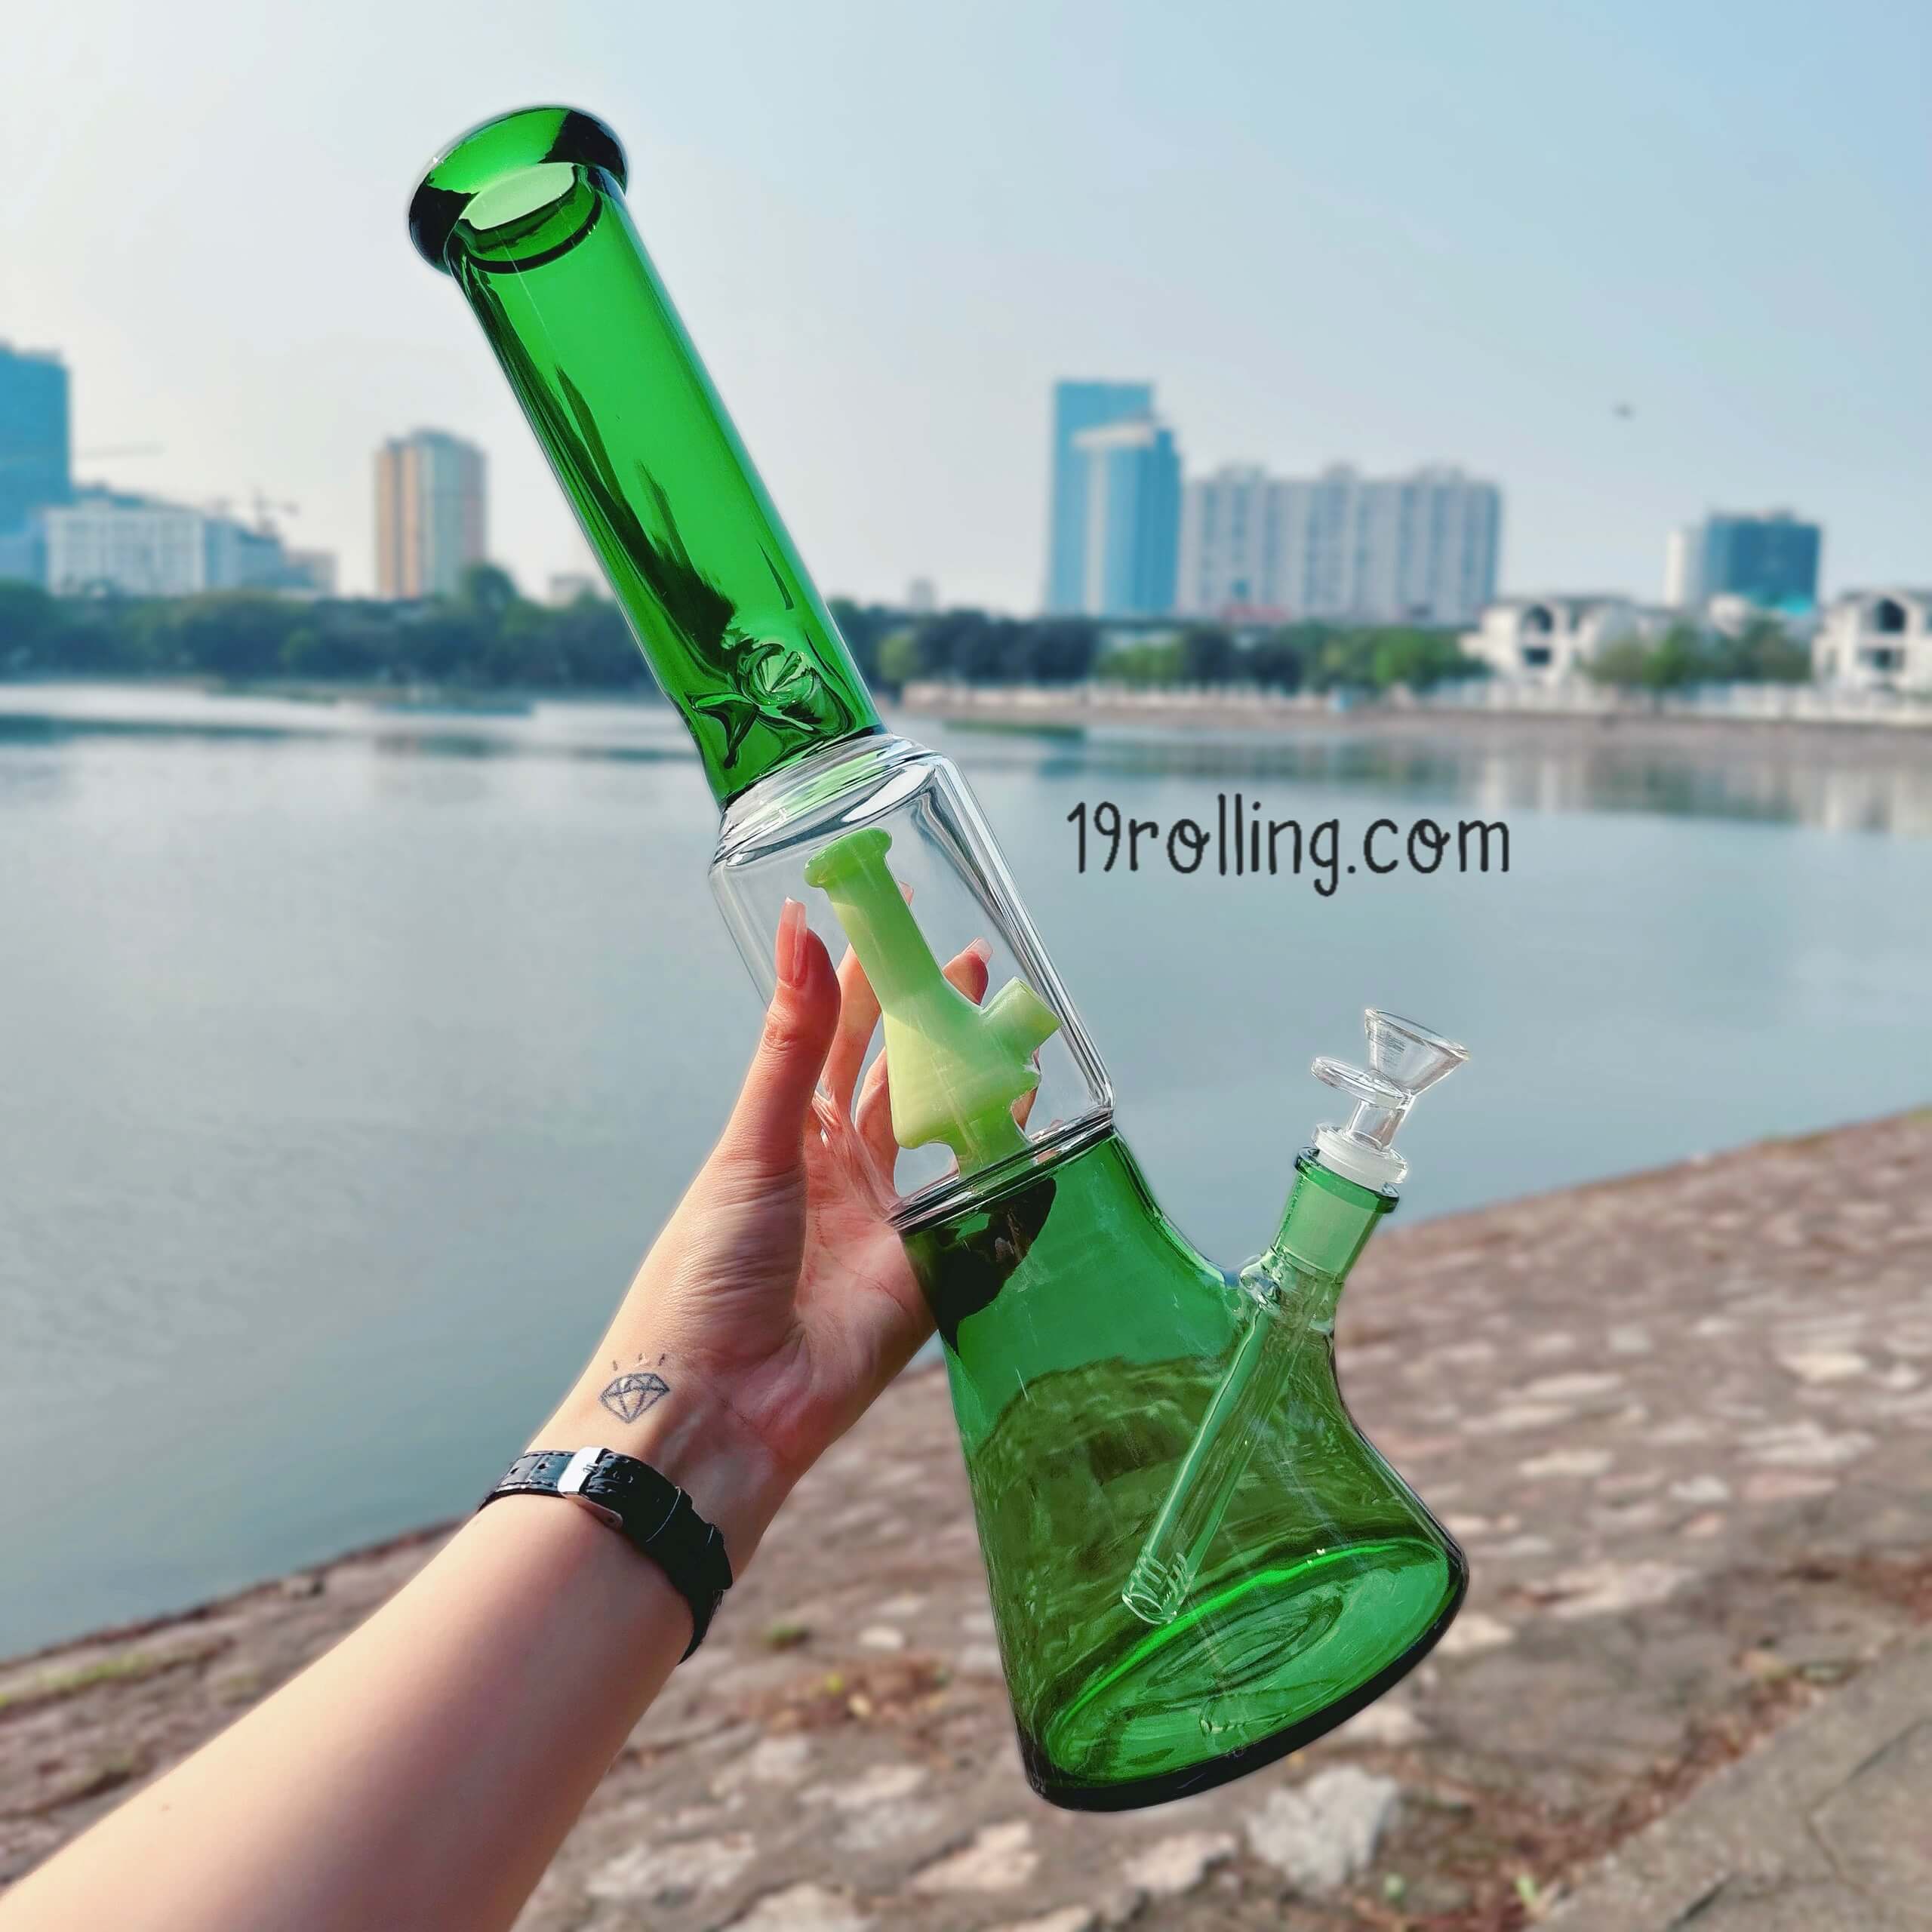 BoongGlass-Bụng-Bự-45CM